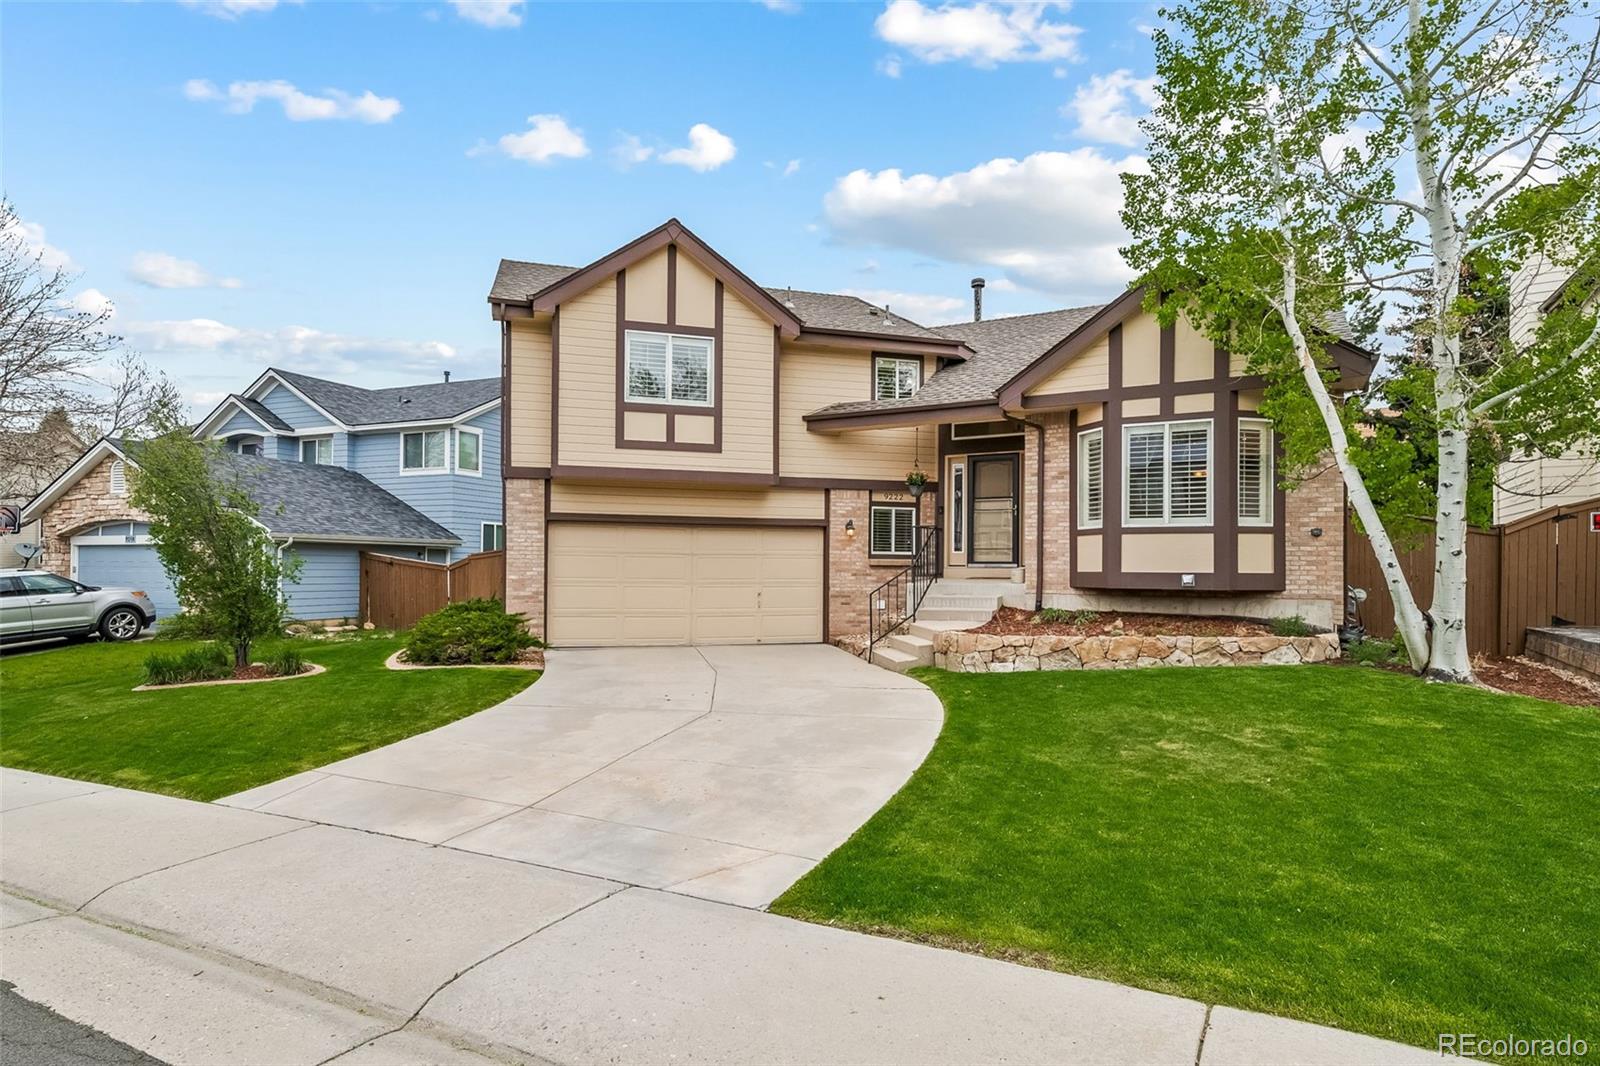 Report Image for 9222  Buttonhill Court,Highlands Ranch, Colorado